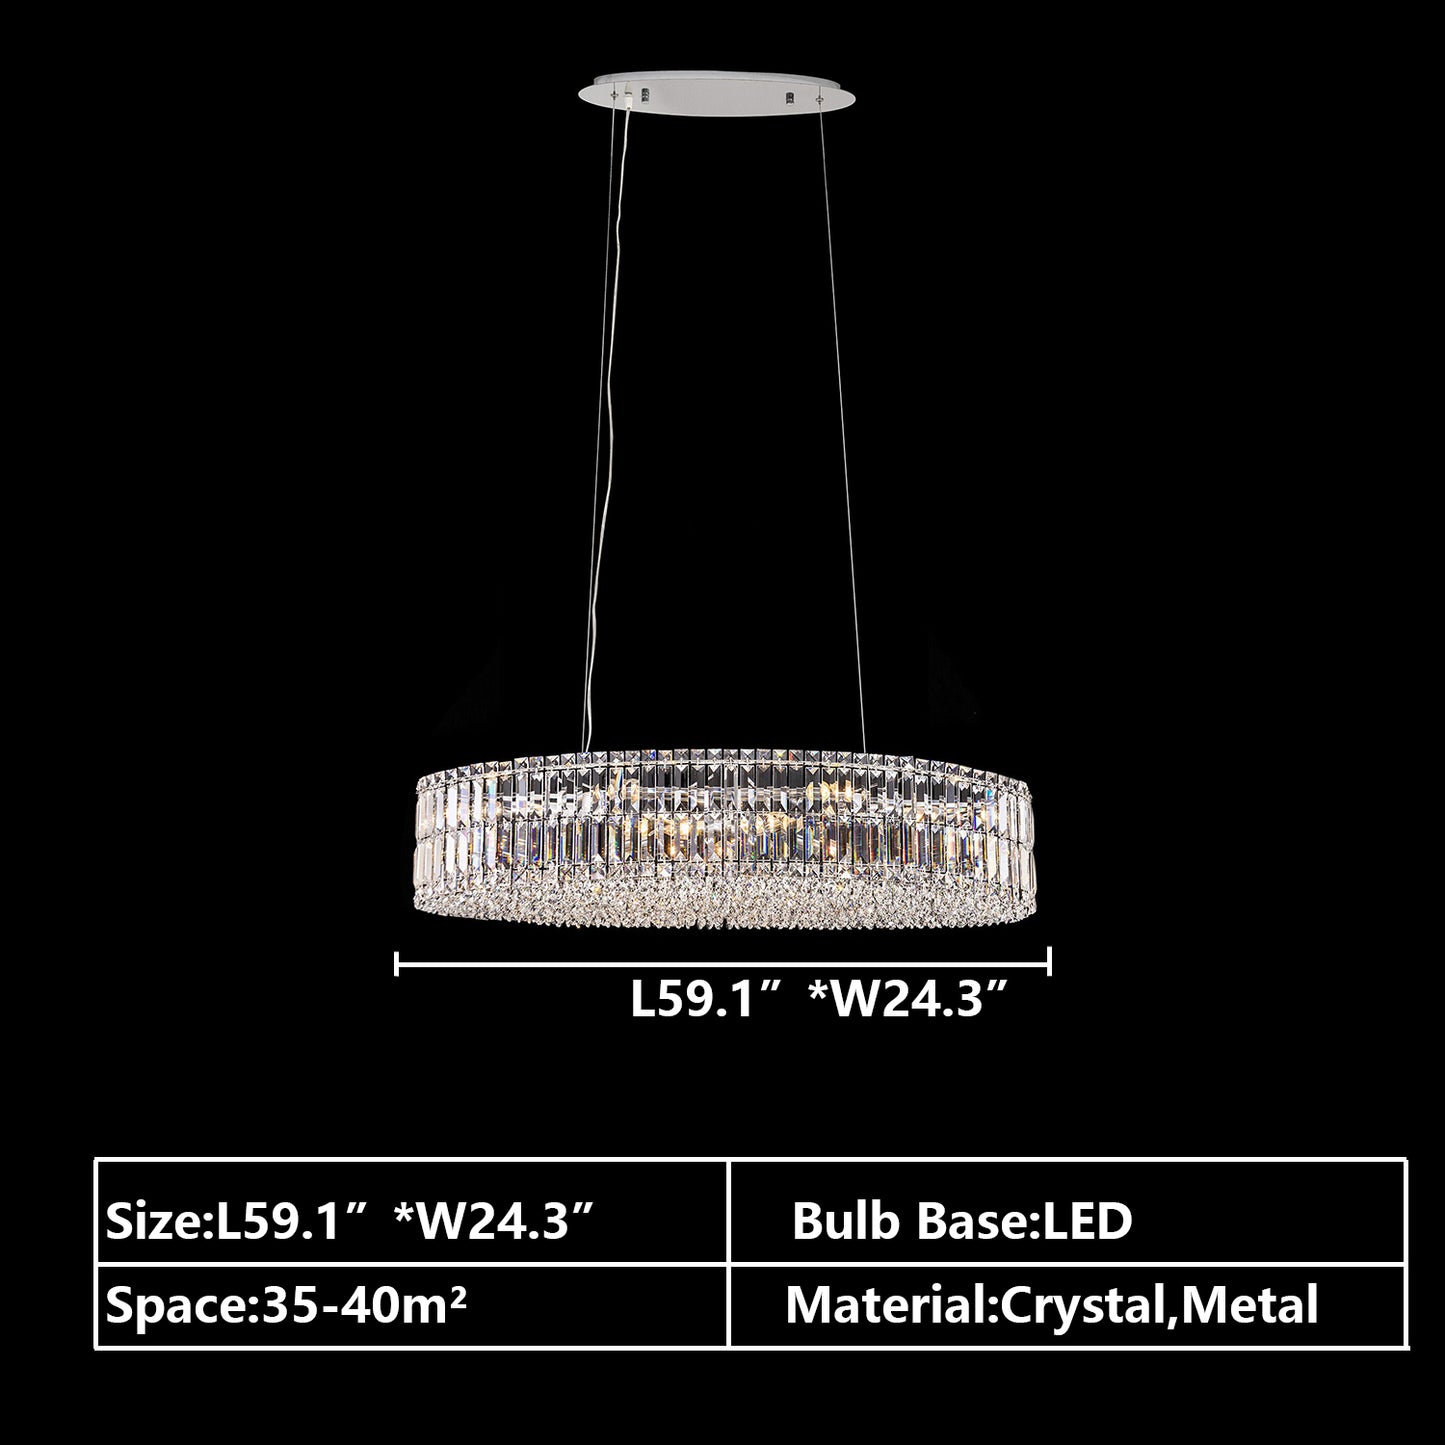 Oval:L59.1"*W24.3" chandelier,chandeliers,pendant,round,oval,ceiling,crystal,metal,chrome,silver,clear crystal,adjustable,chain,light luxury,luxury,living room,dining room,foyer,entrys,hallway,bathroom,bedroom,home office